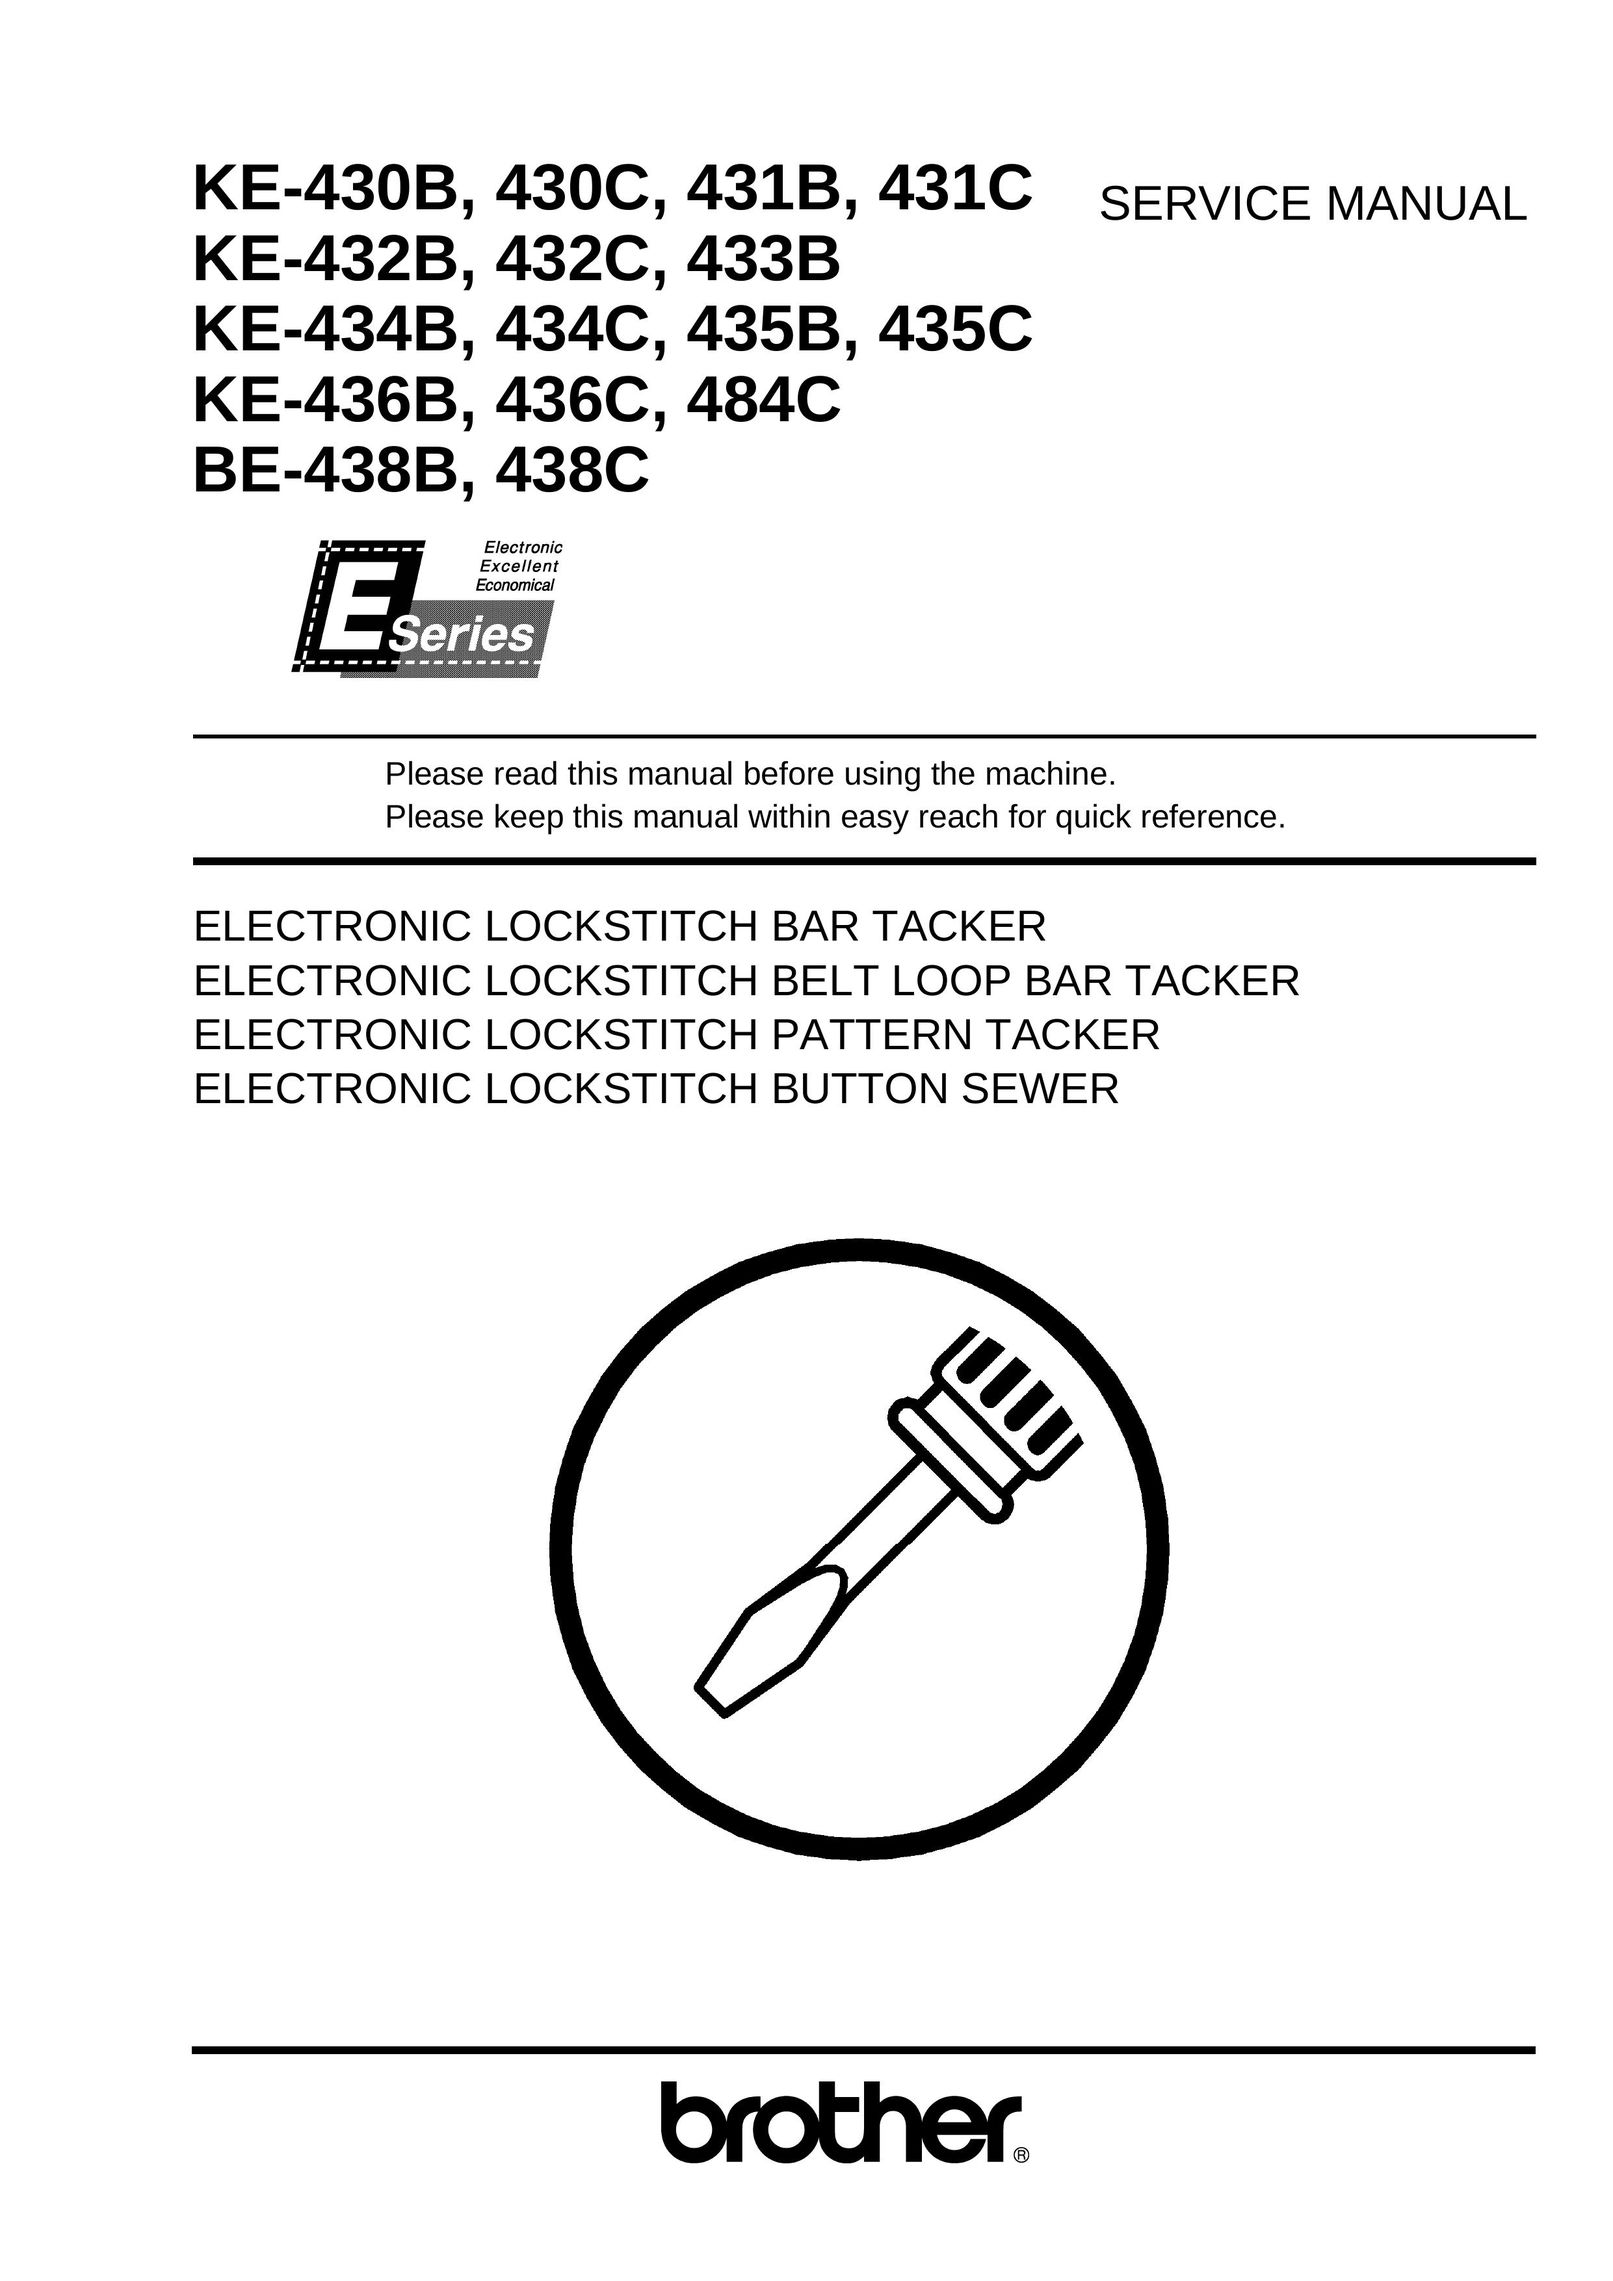 Brother 484C Sewing Machine User Manual